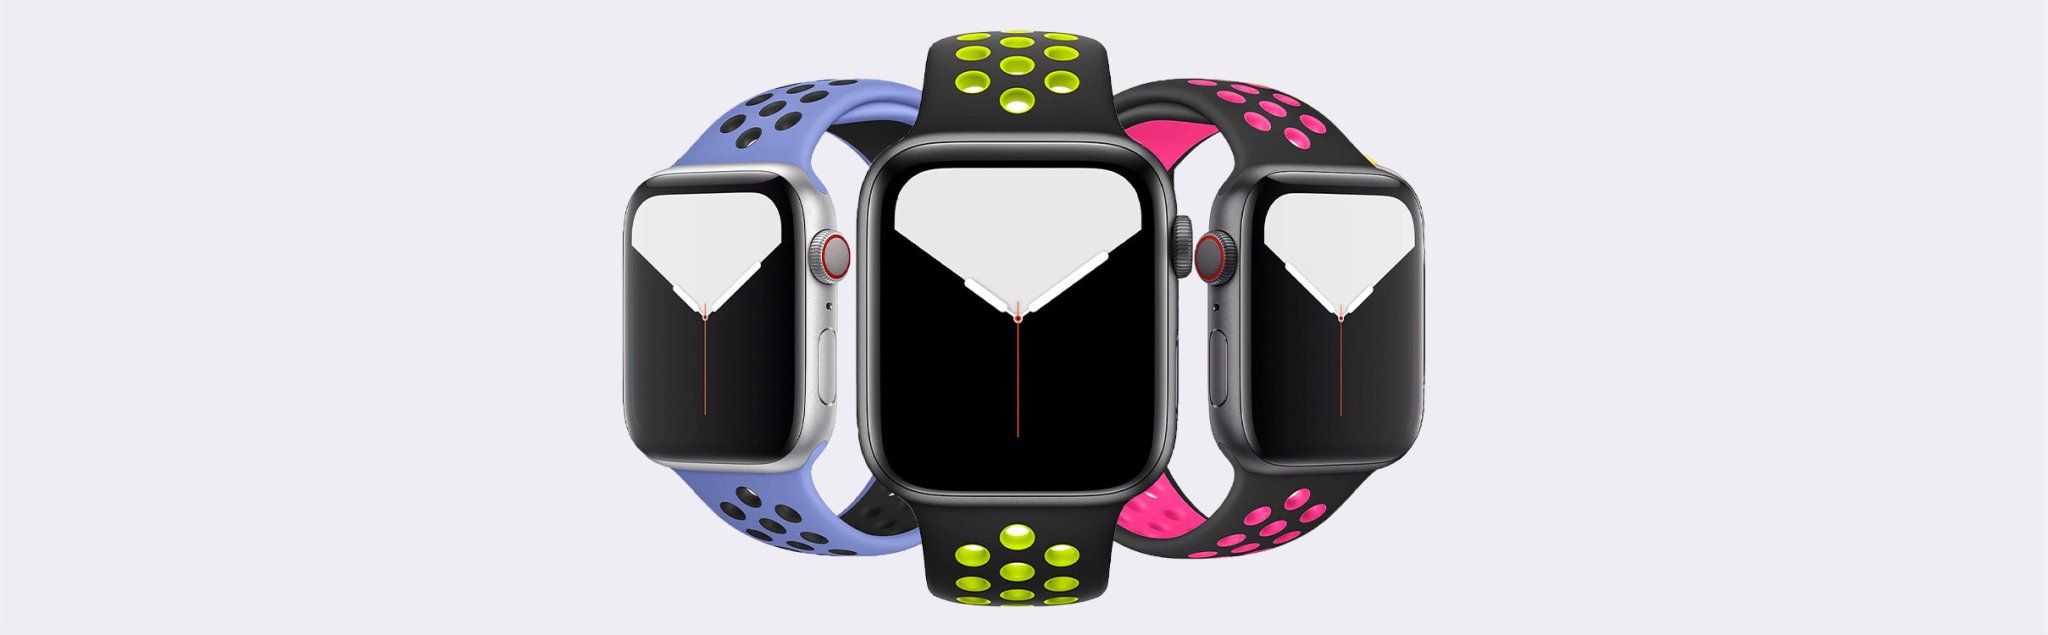 Silicone Sport Strap For Apple Watch - Accessories Gifts UK